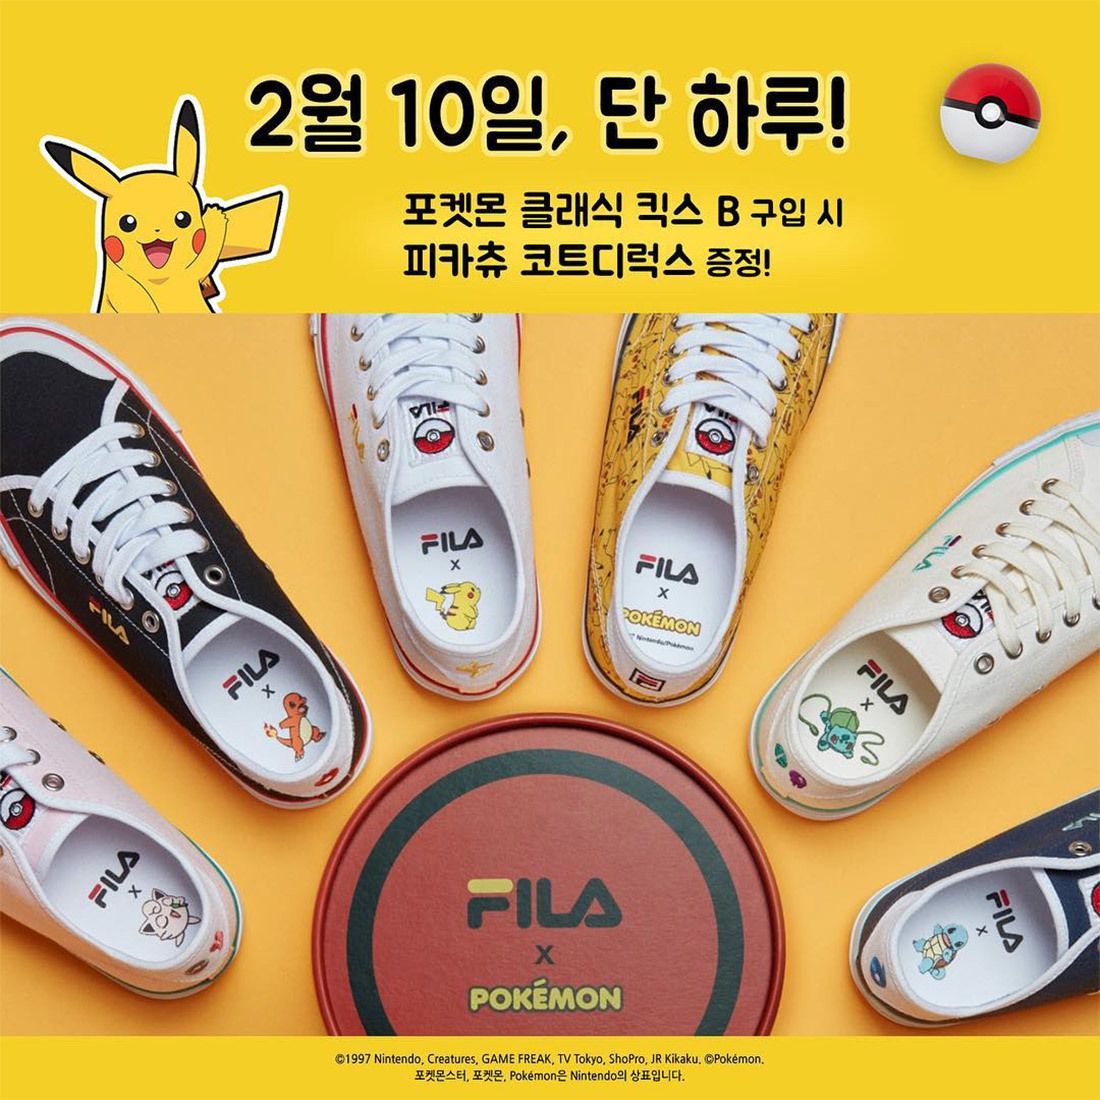 Pokémon-inspired trainers are launched by fila